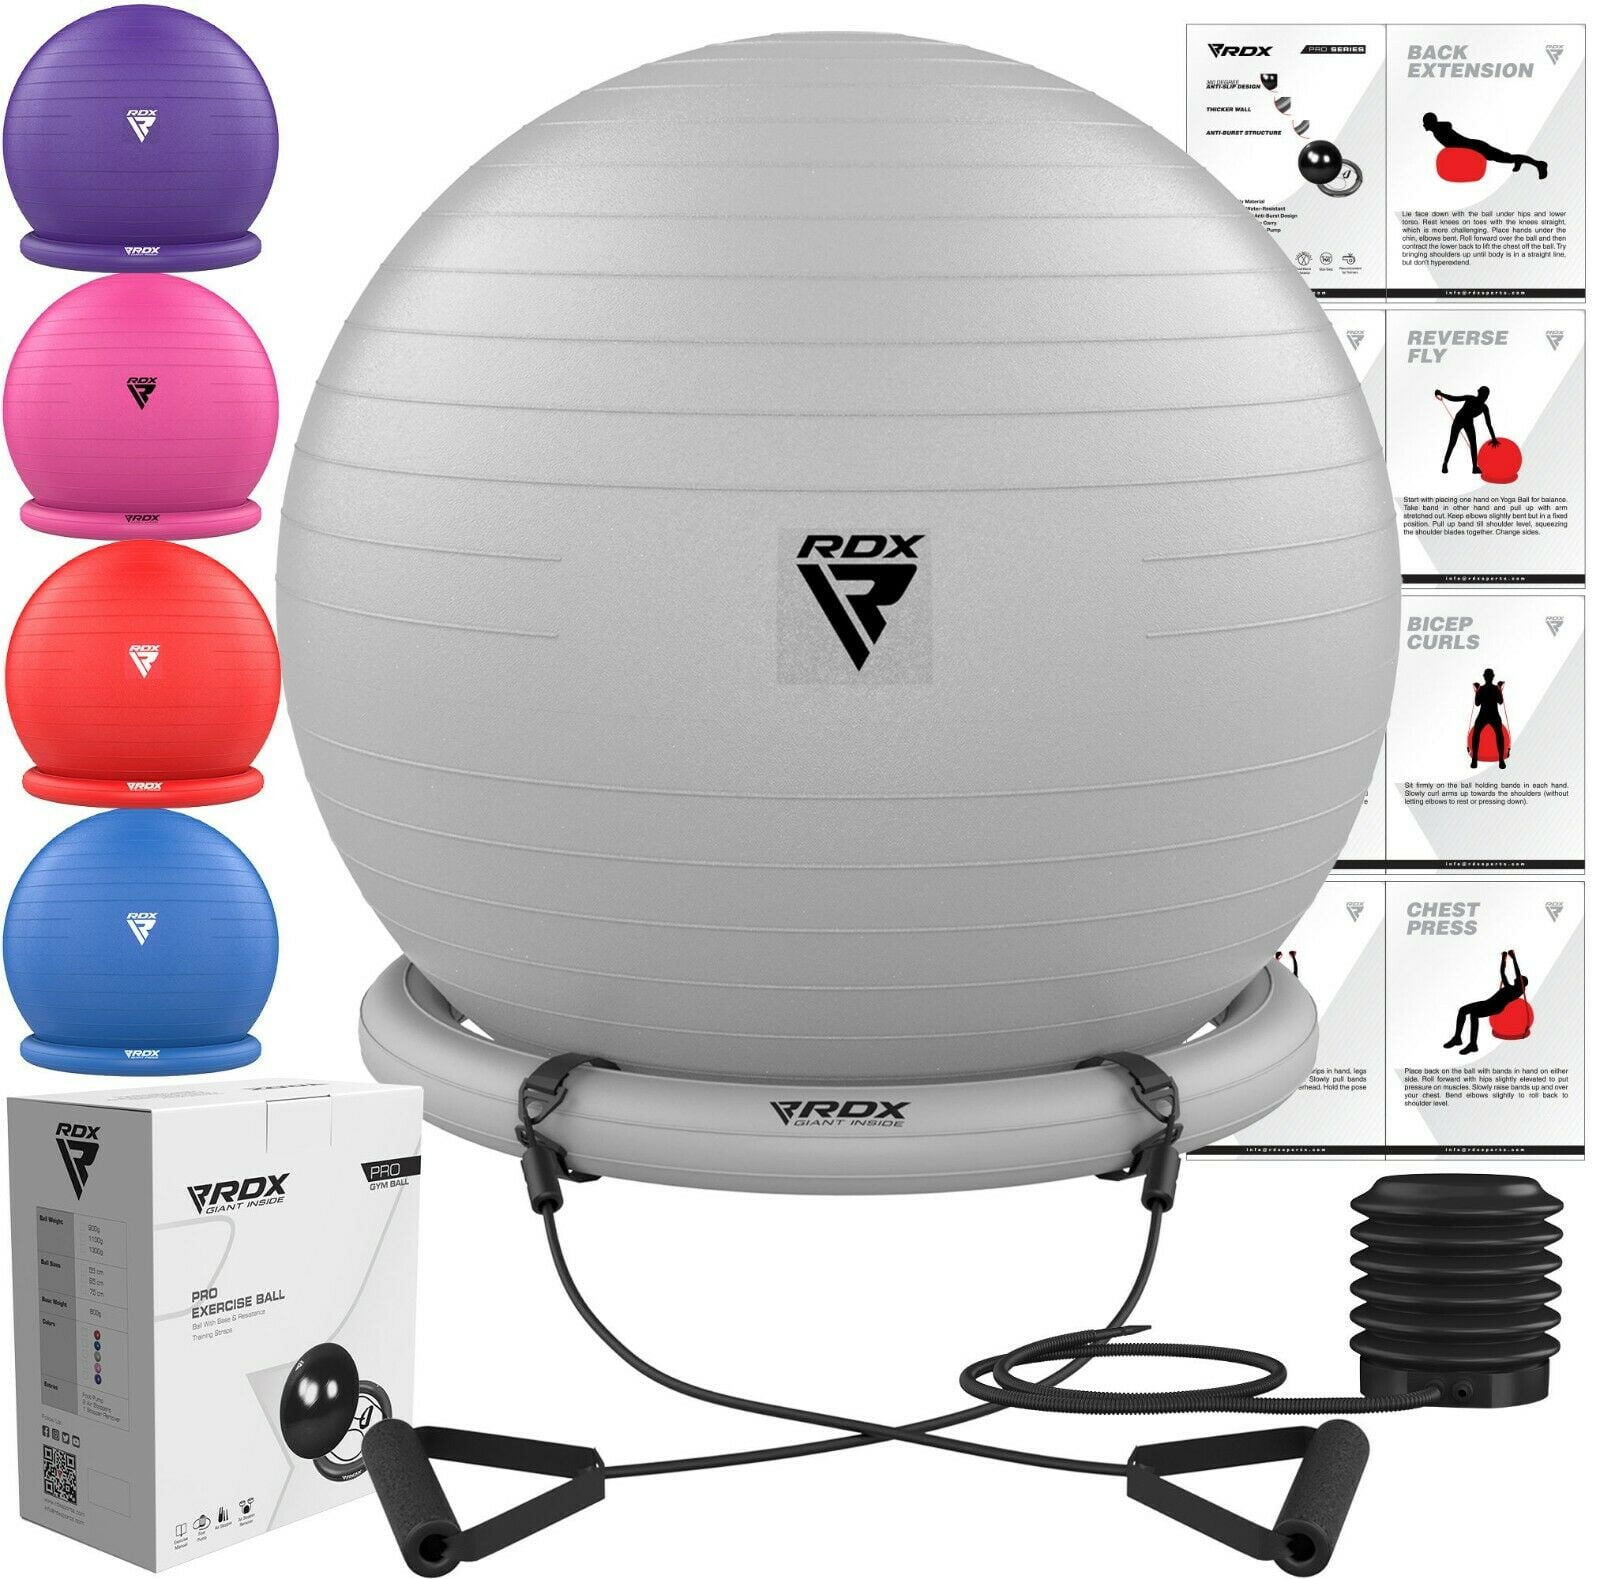 Anti-Burst PVC Swiss Ball Yoga Pilates Fitness Balance Handles Birthing Pregnancy Gym Home Workout Training Support 250kgs RDX Exercise Ball Chair with Resistance Band Stability Base Ring Quick Pump 